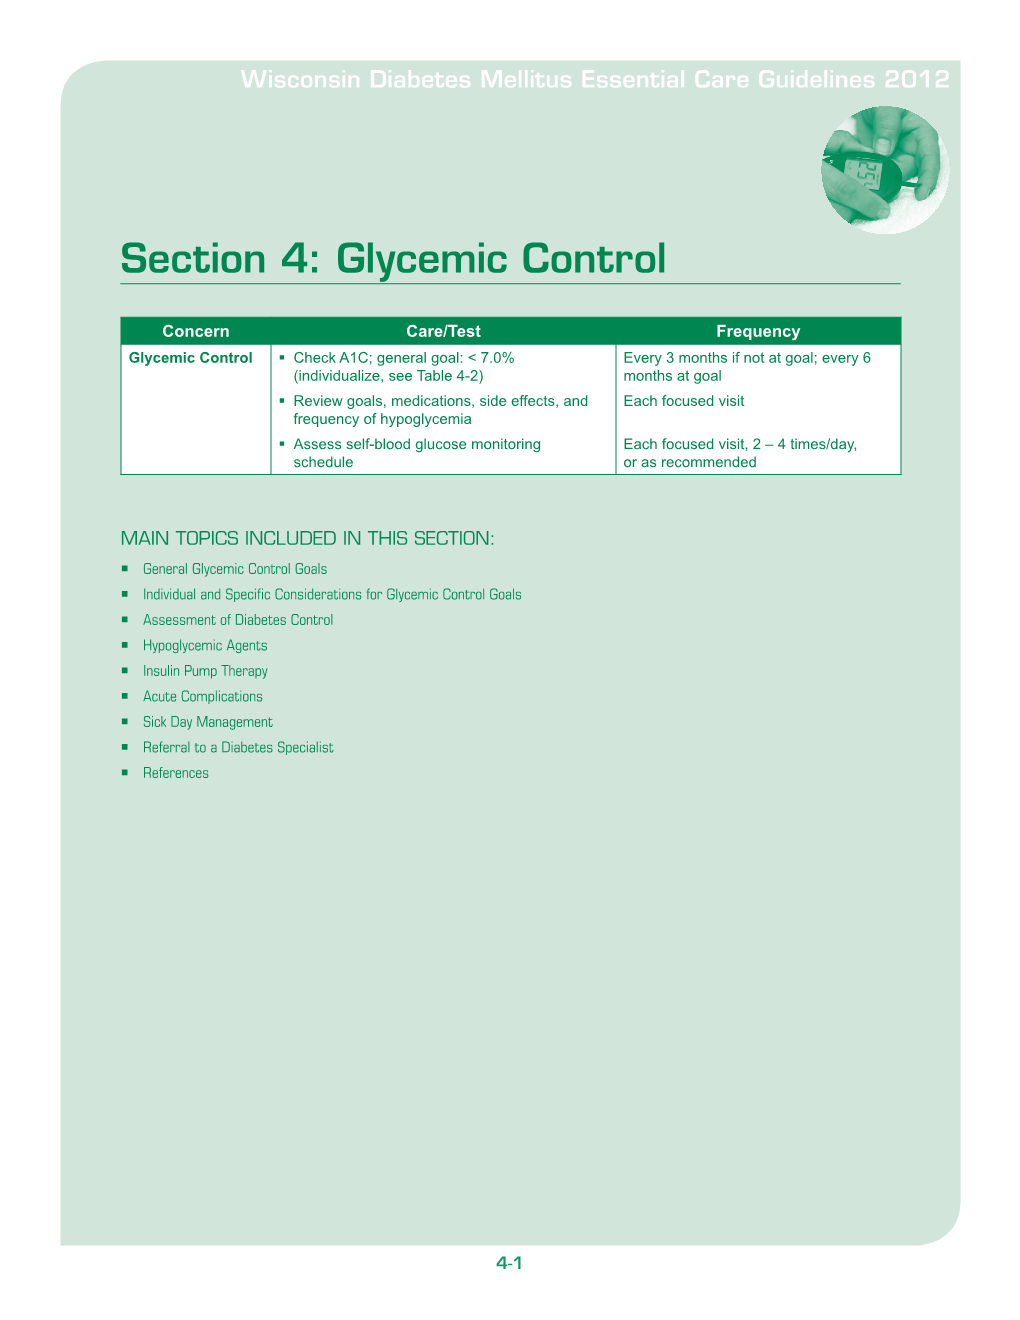 Section 4: Glycemic Control